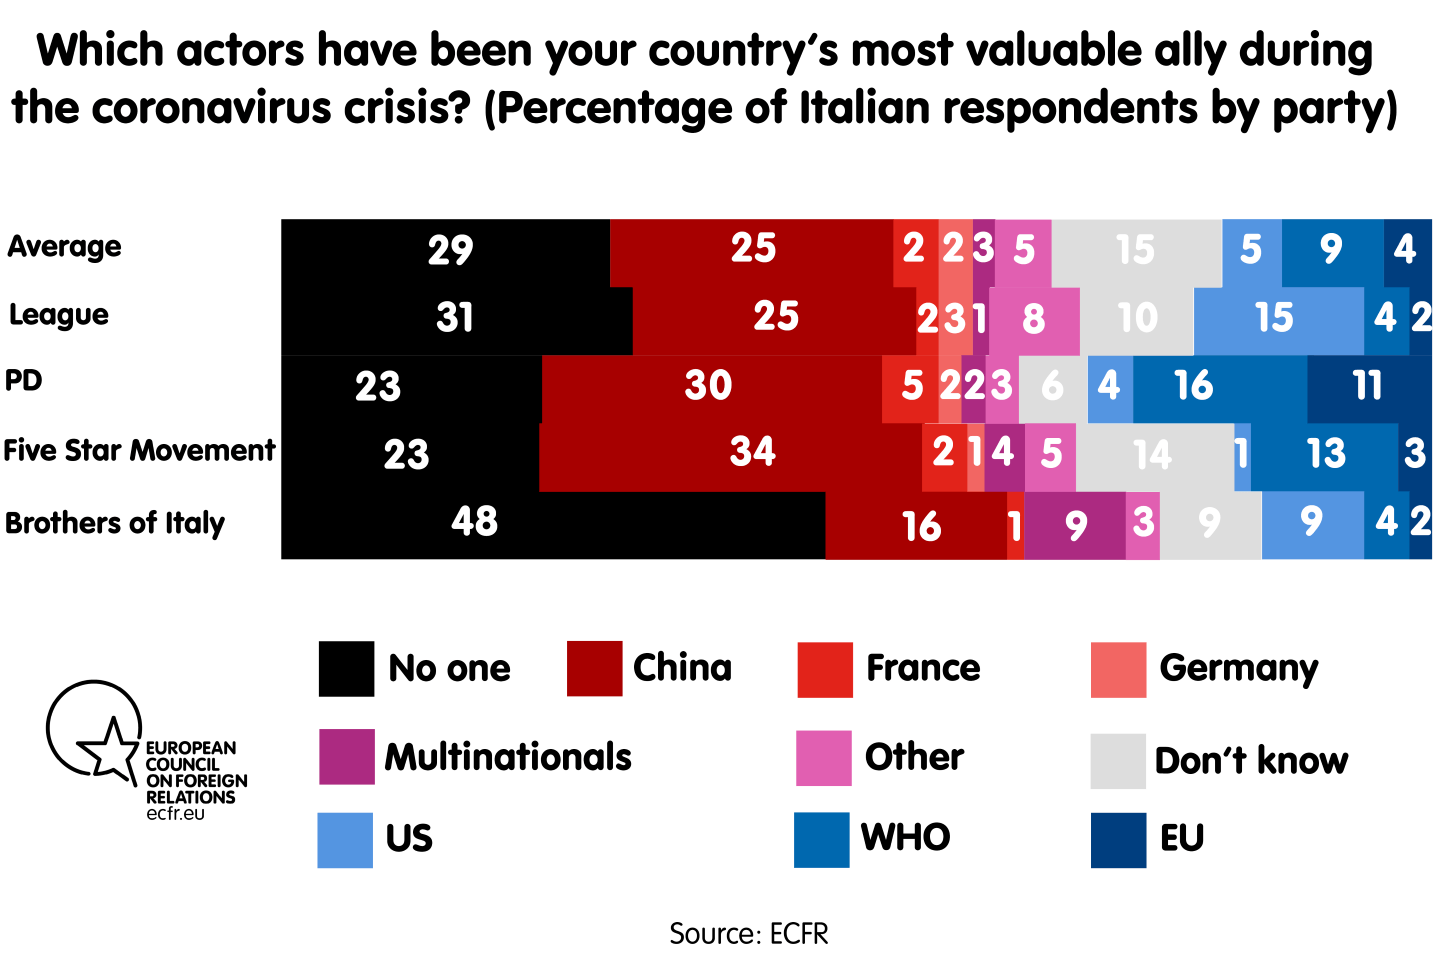 Which actors have been your country's most valuable ally during the coronavirus crisis? By party